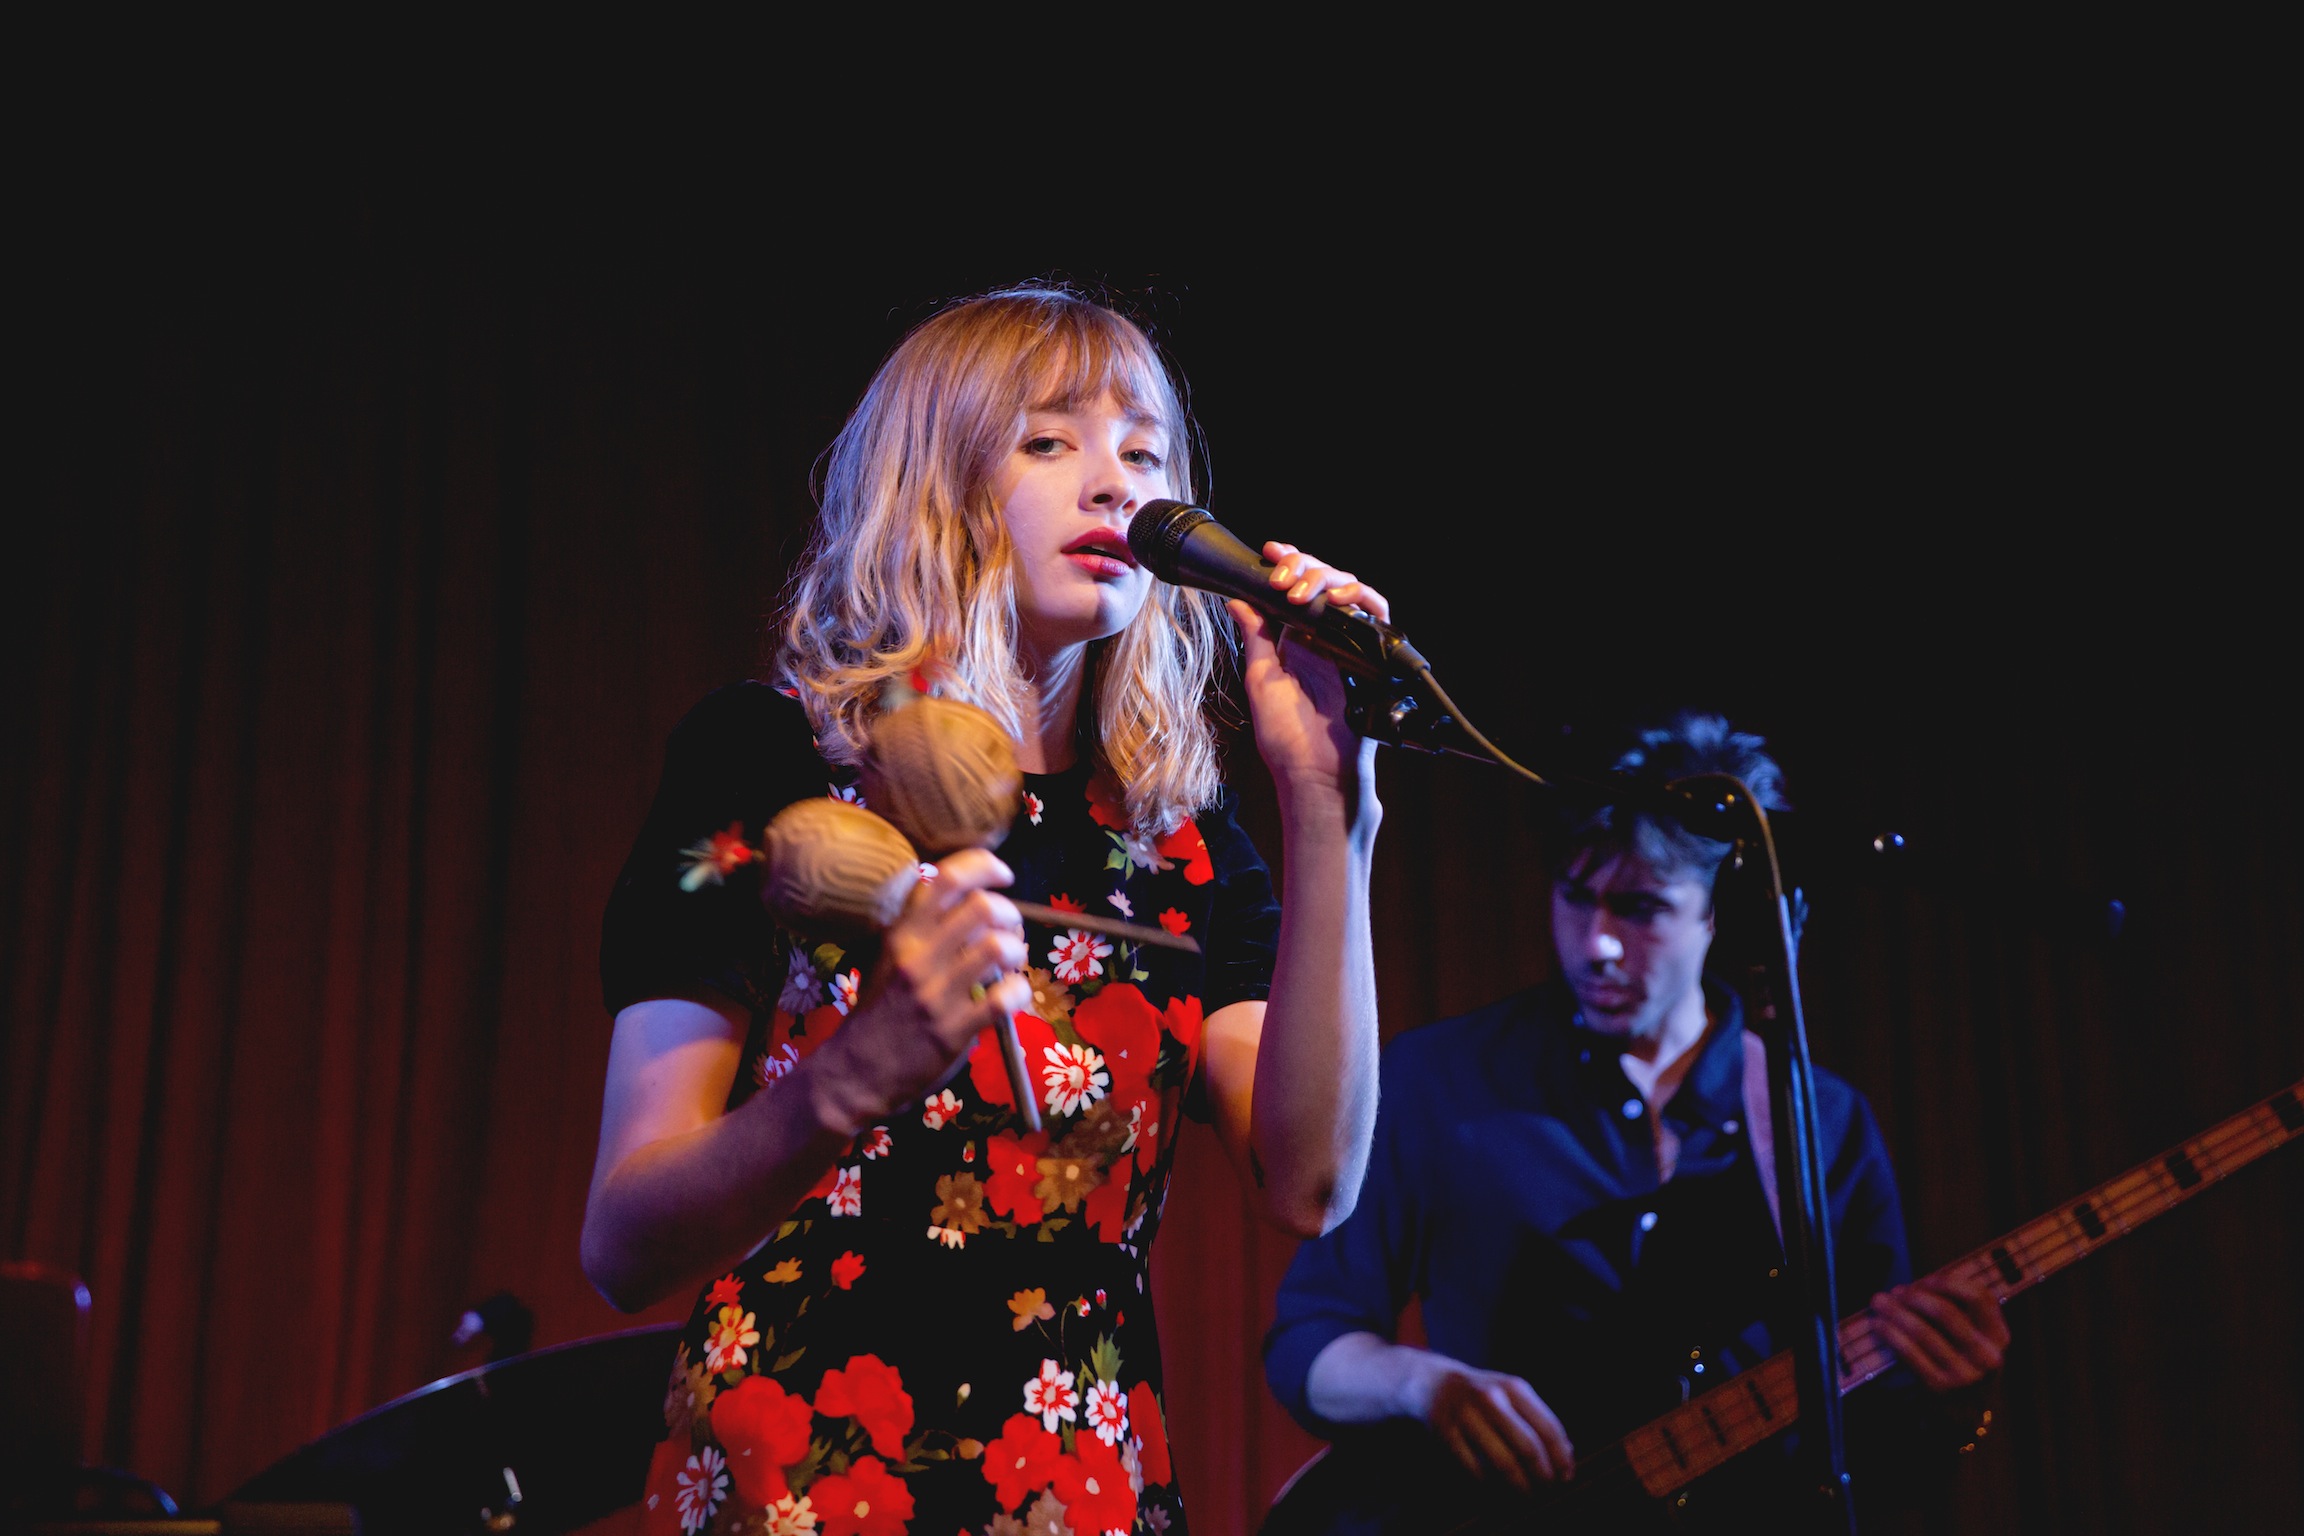 Alexandra Savior at Hotel Cafe 8/10/16. Photo by Michelle Shiers (@MichelleShiers) for www.BlurredCulture.com.